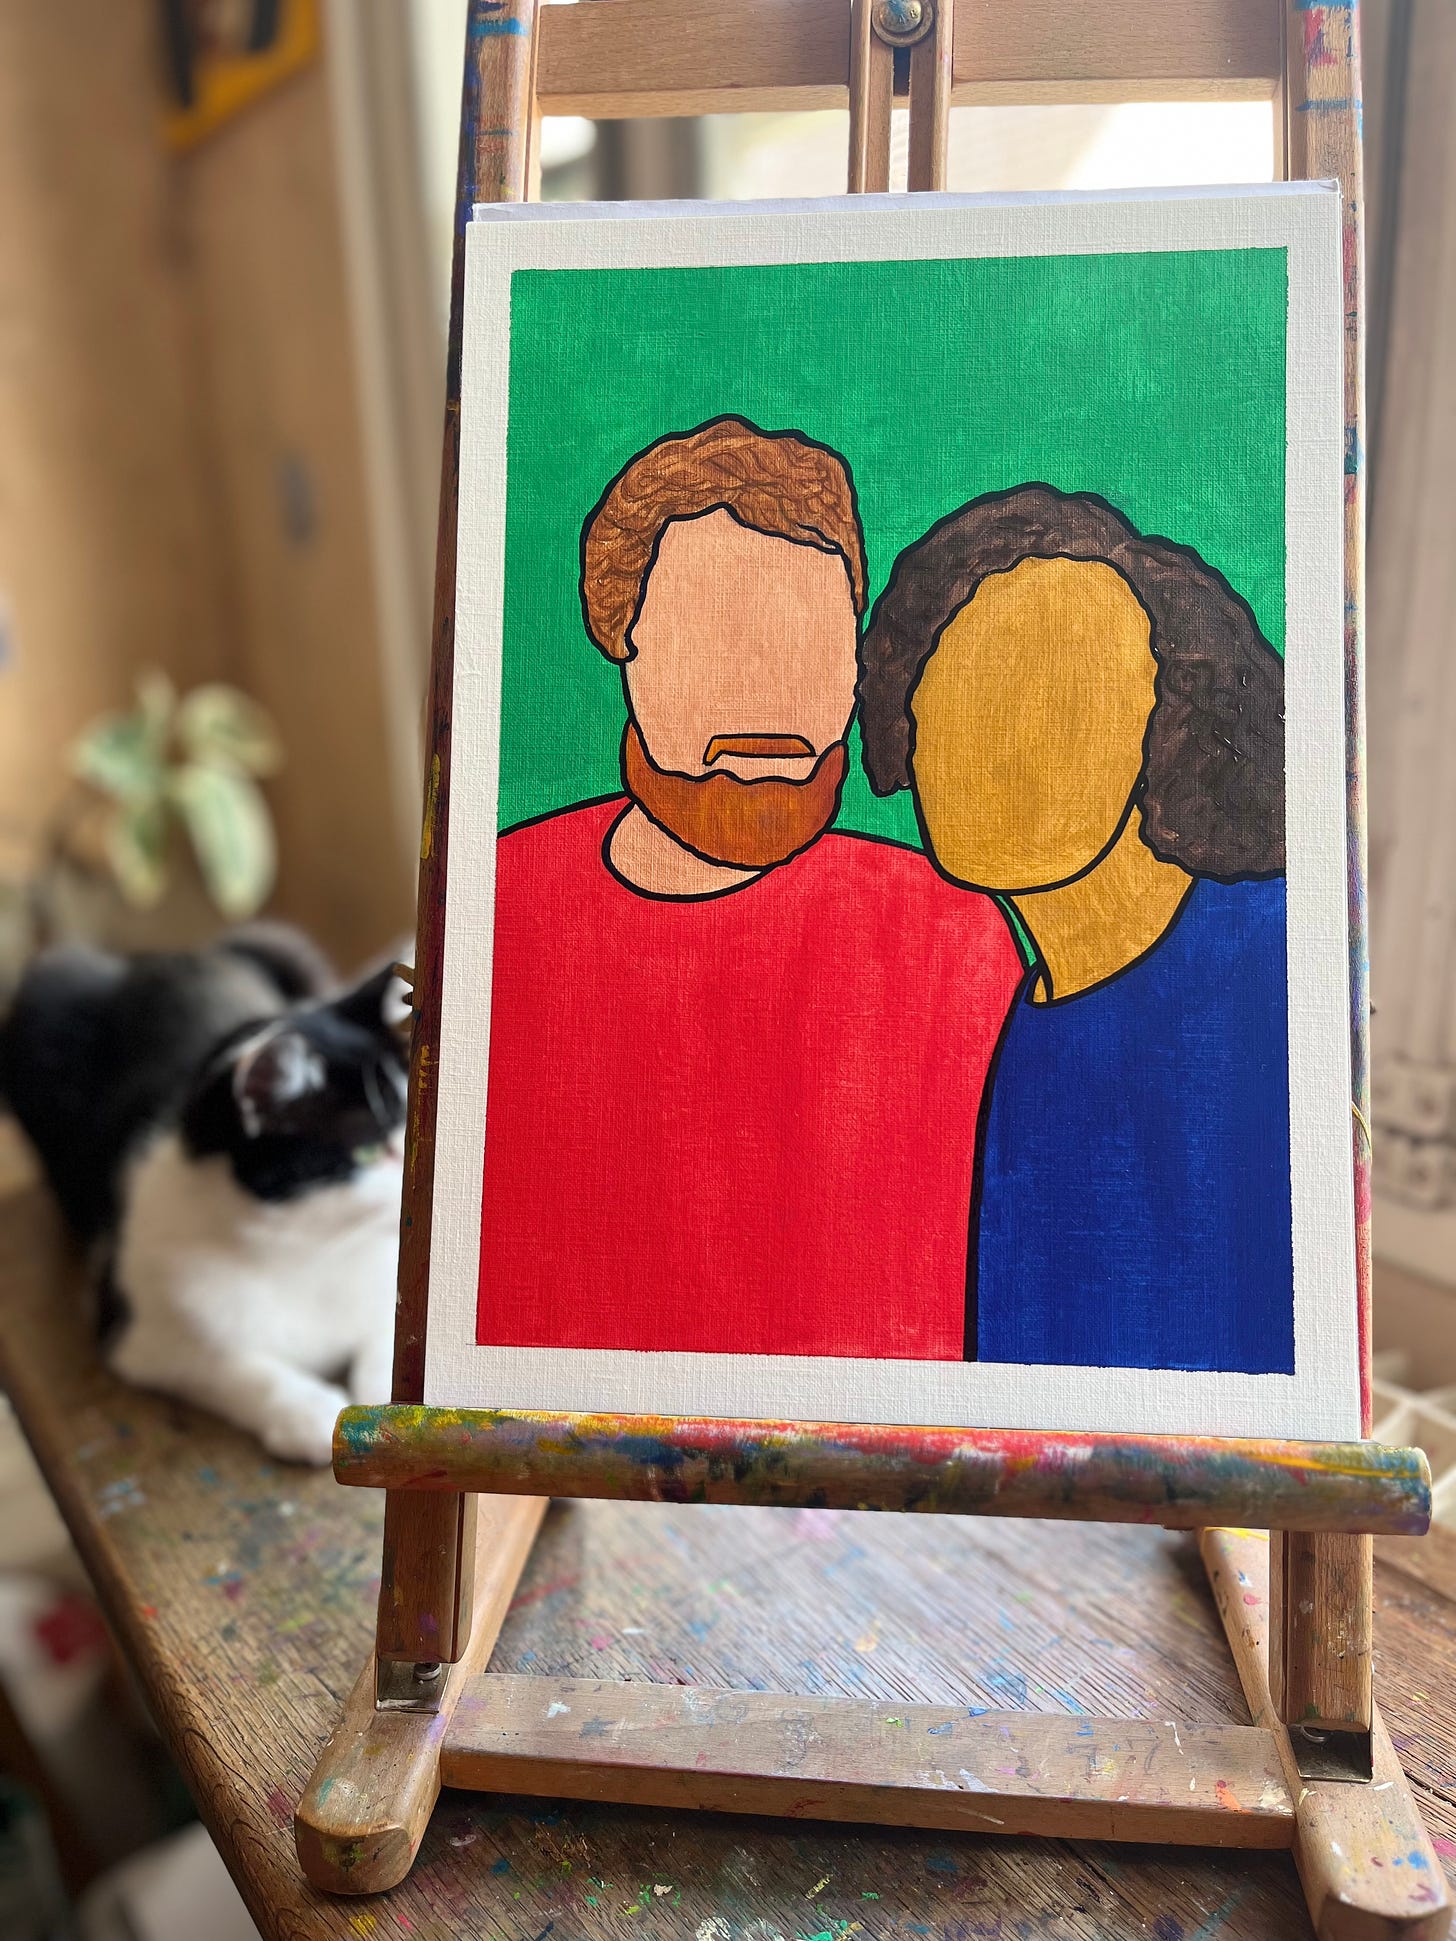 Two faceless portraits on a green background on an easel near a cat